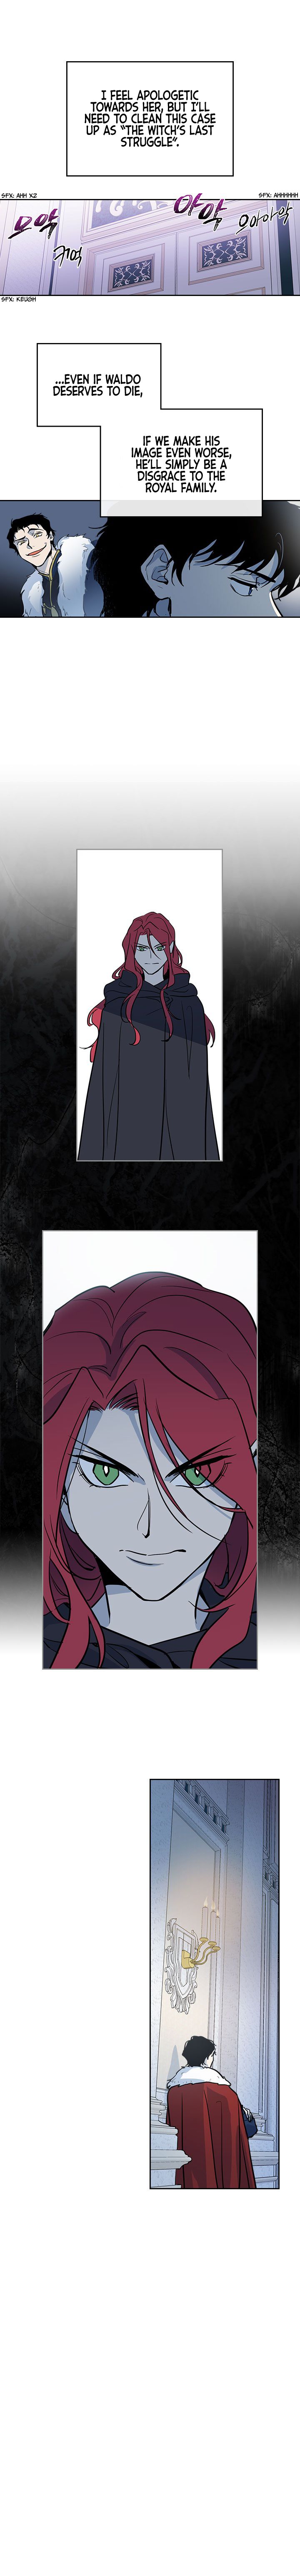 The Lady and the Beast - Chapter 2 Page 8